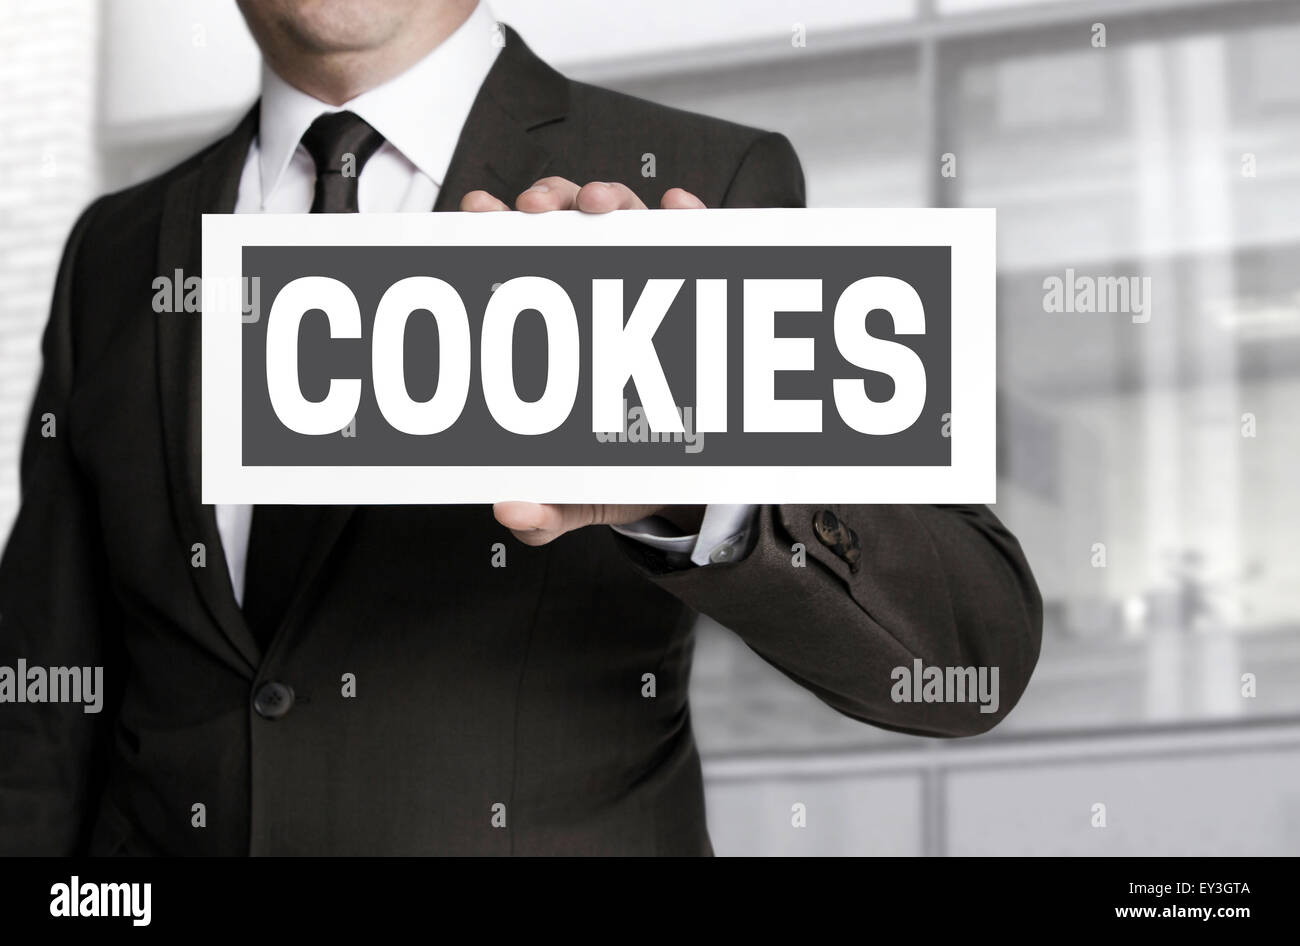 Cookies plate is held by businessman background. Stock Photo